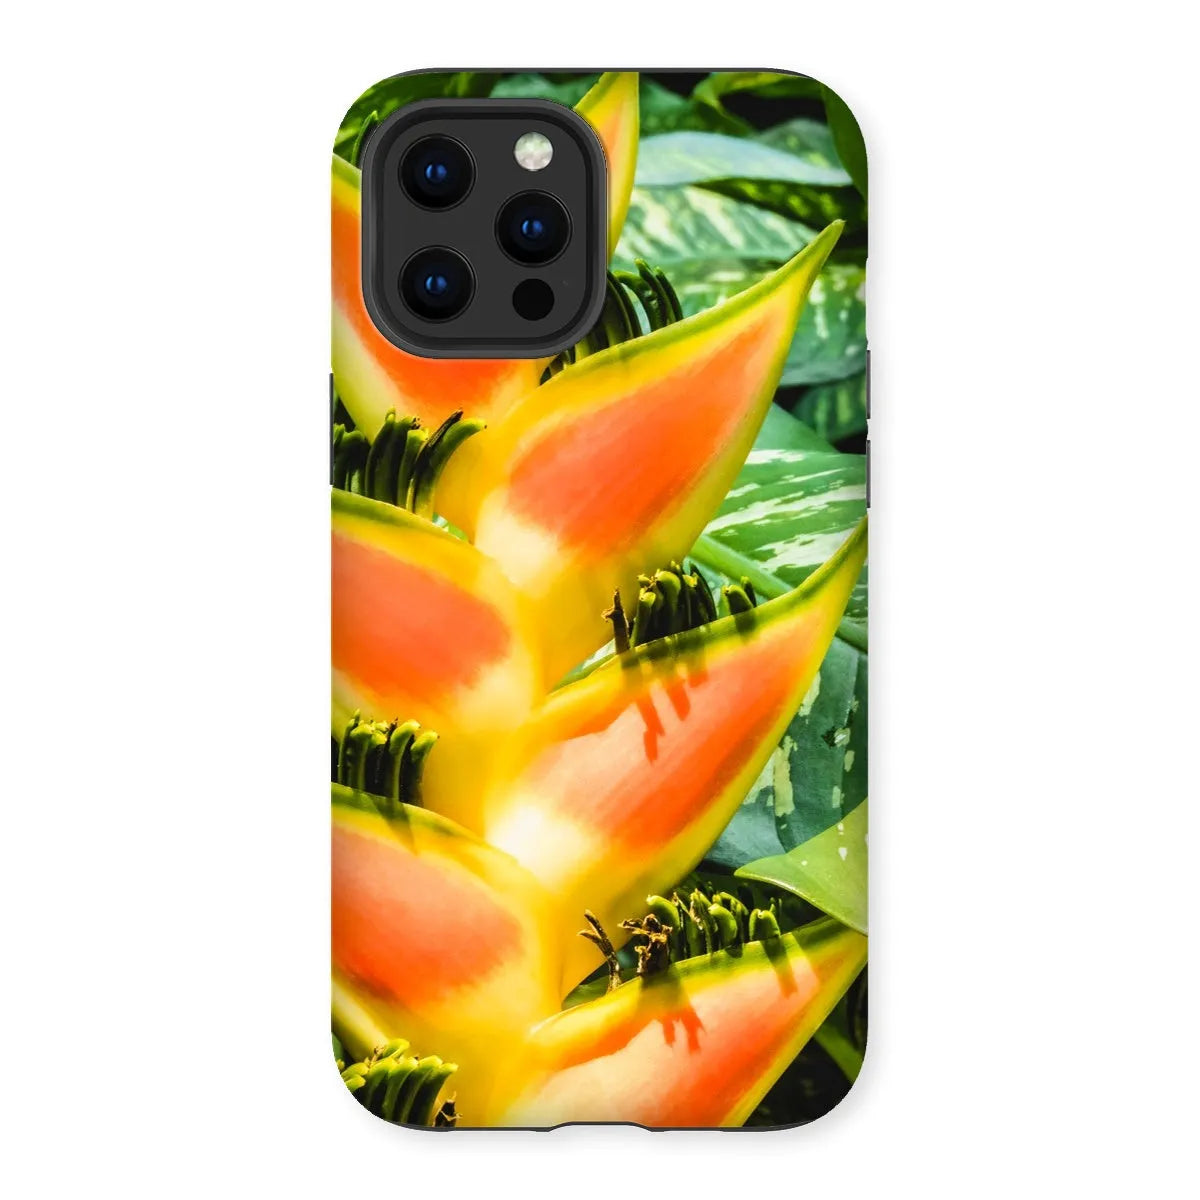 Showstopper Tough Phone Case - Iphone 13 Pro Max / Matte - Mobile Phone Cases - Aesthetic Art